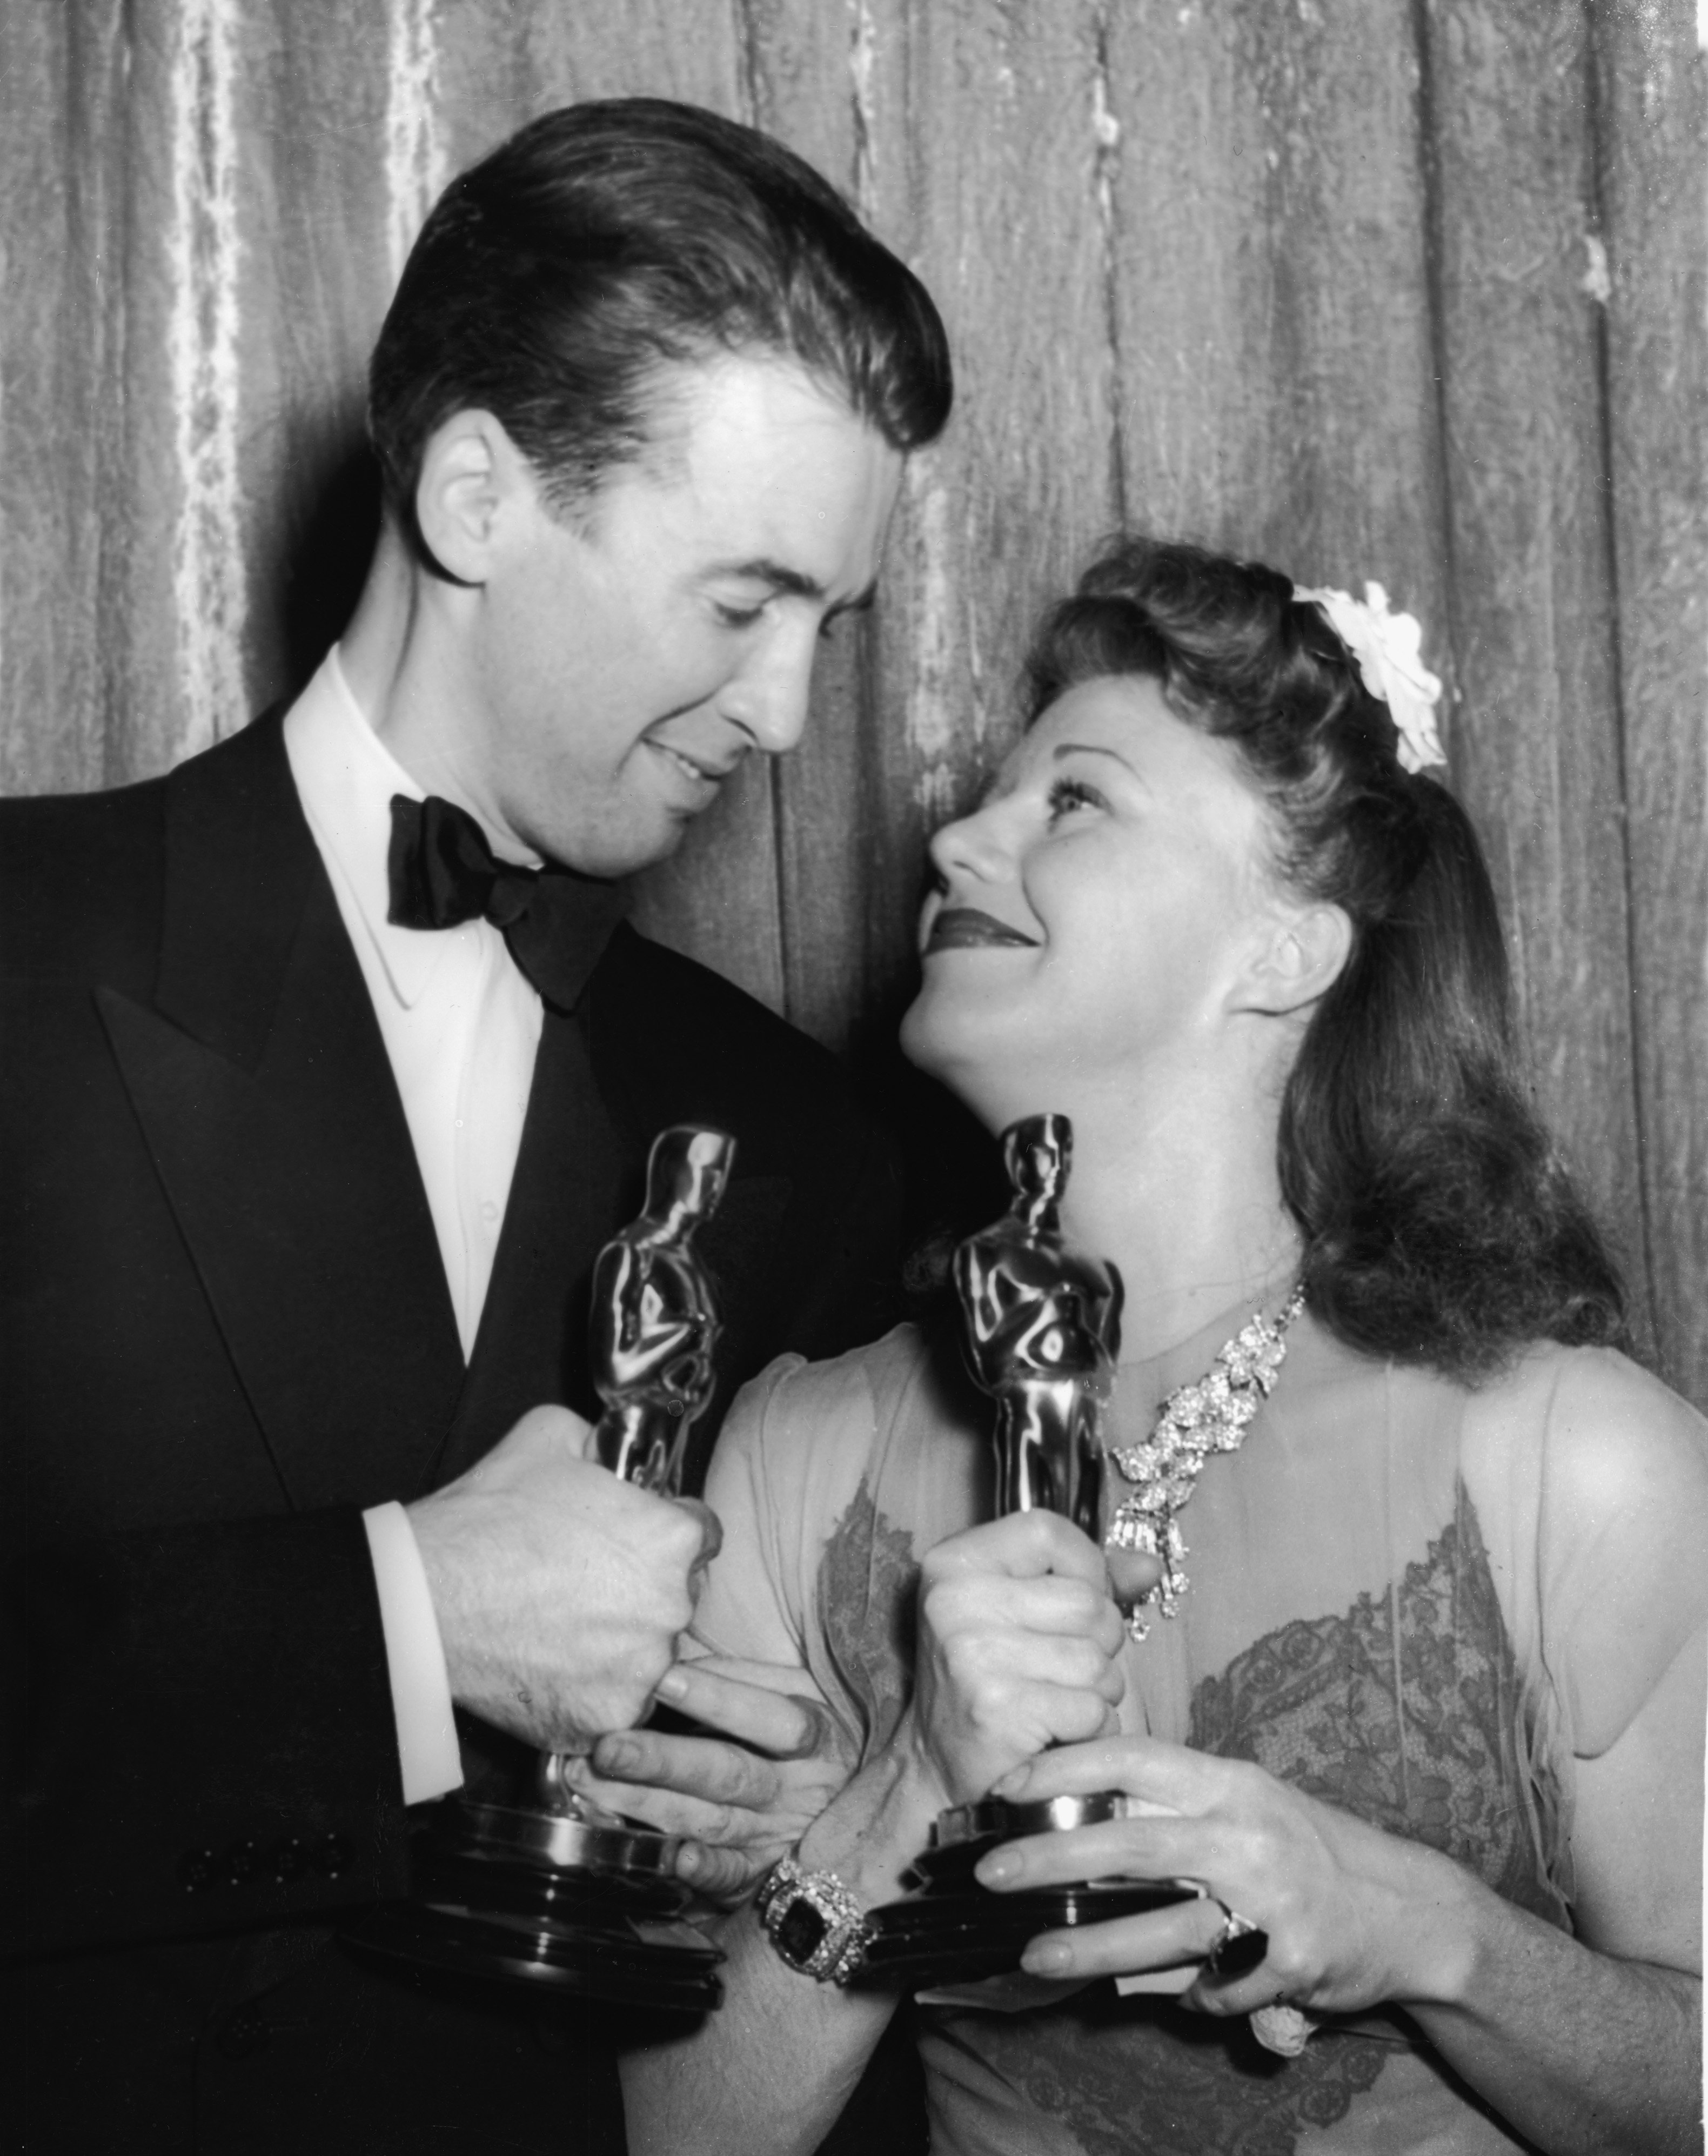 James Stewart and Ginger Rogers with Oscars at the 1940 Academy Awards banquet in Los Angeles, California, on February 27, 1941. | Source: Getty Images